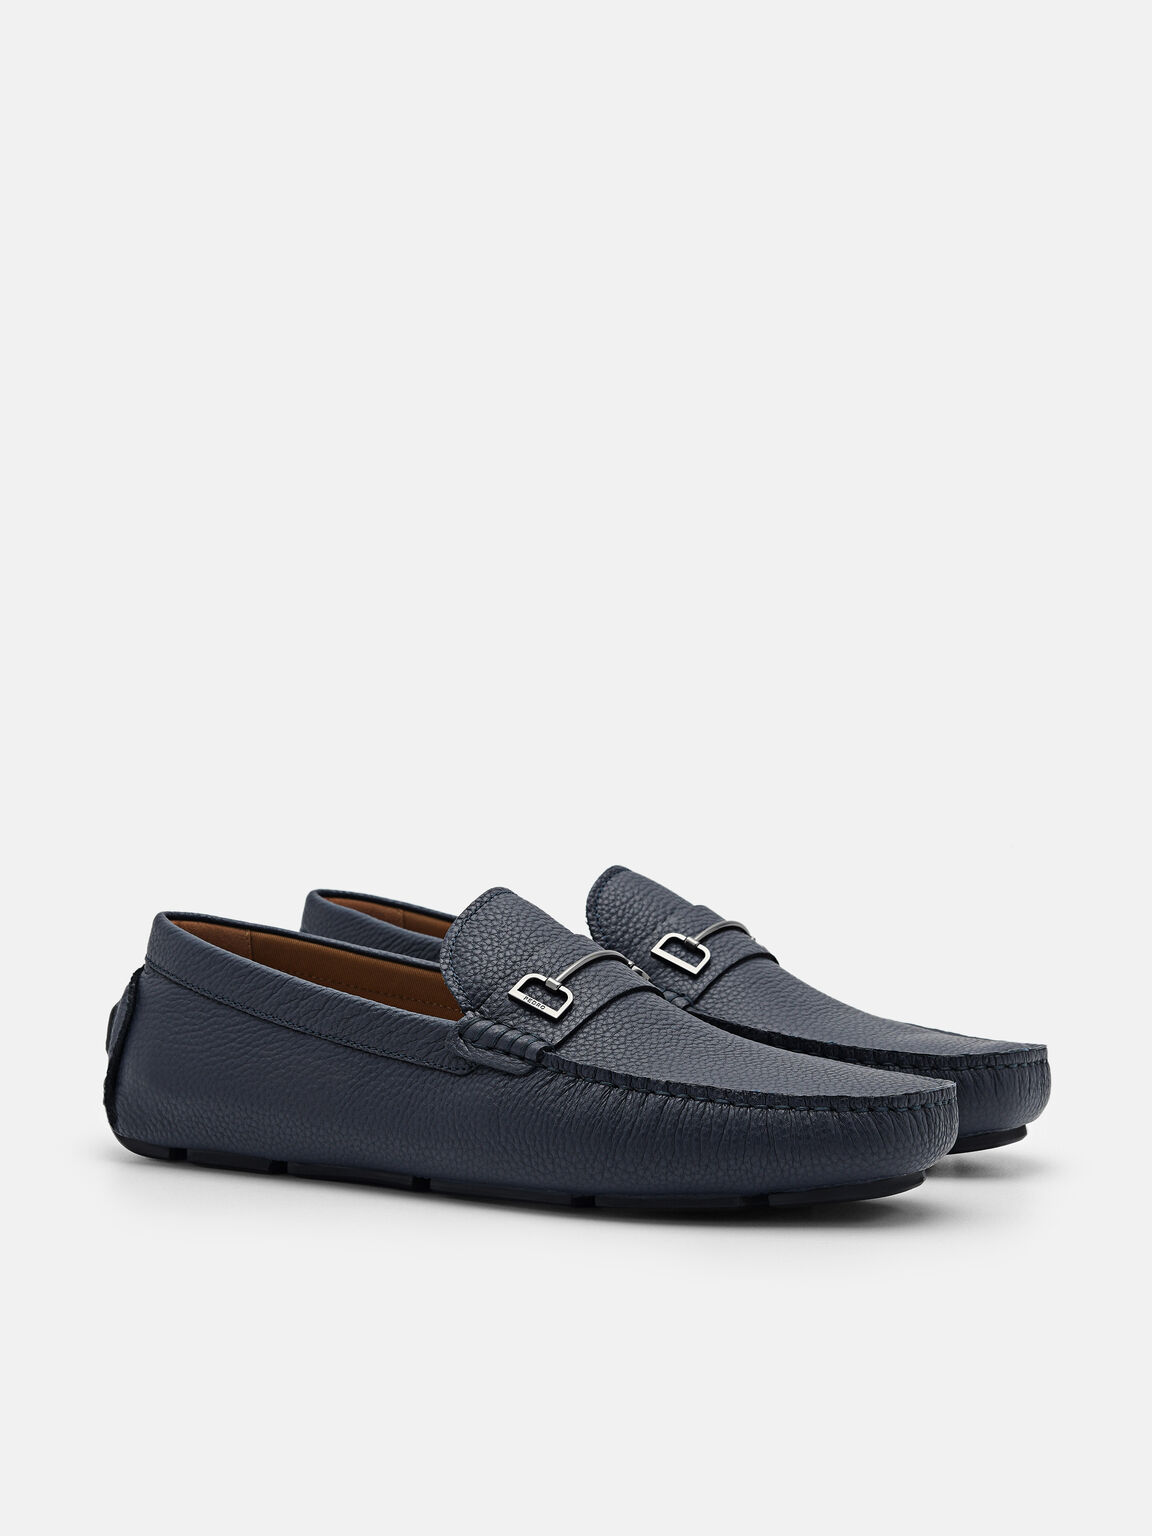 Casey Leather Driving Shoes, Navy, hi-res